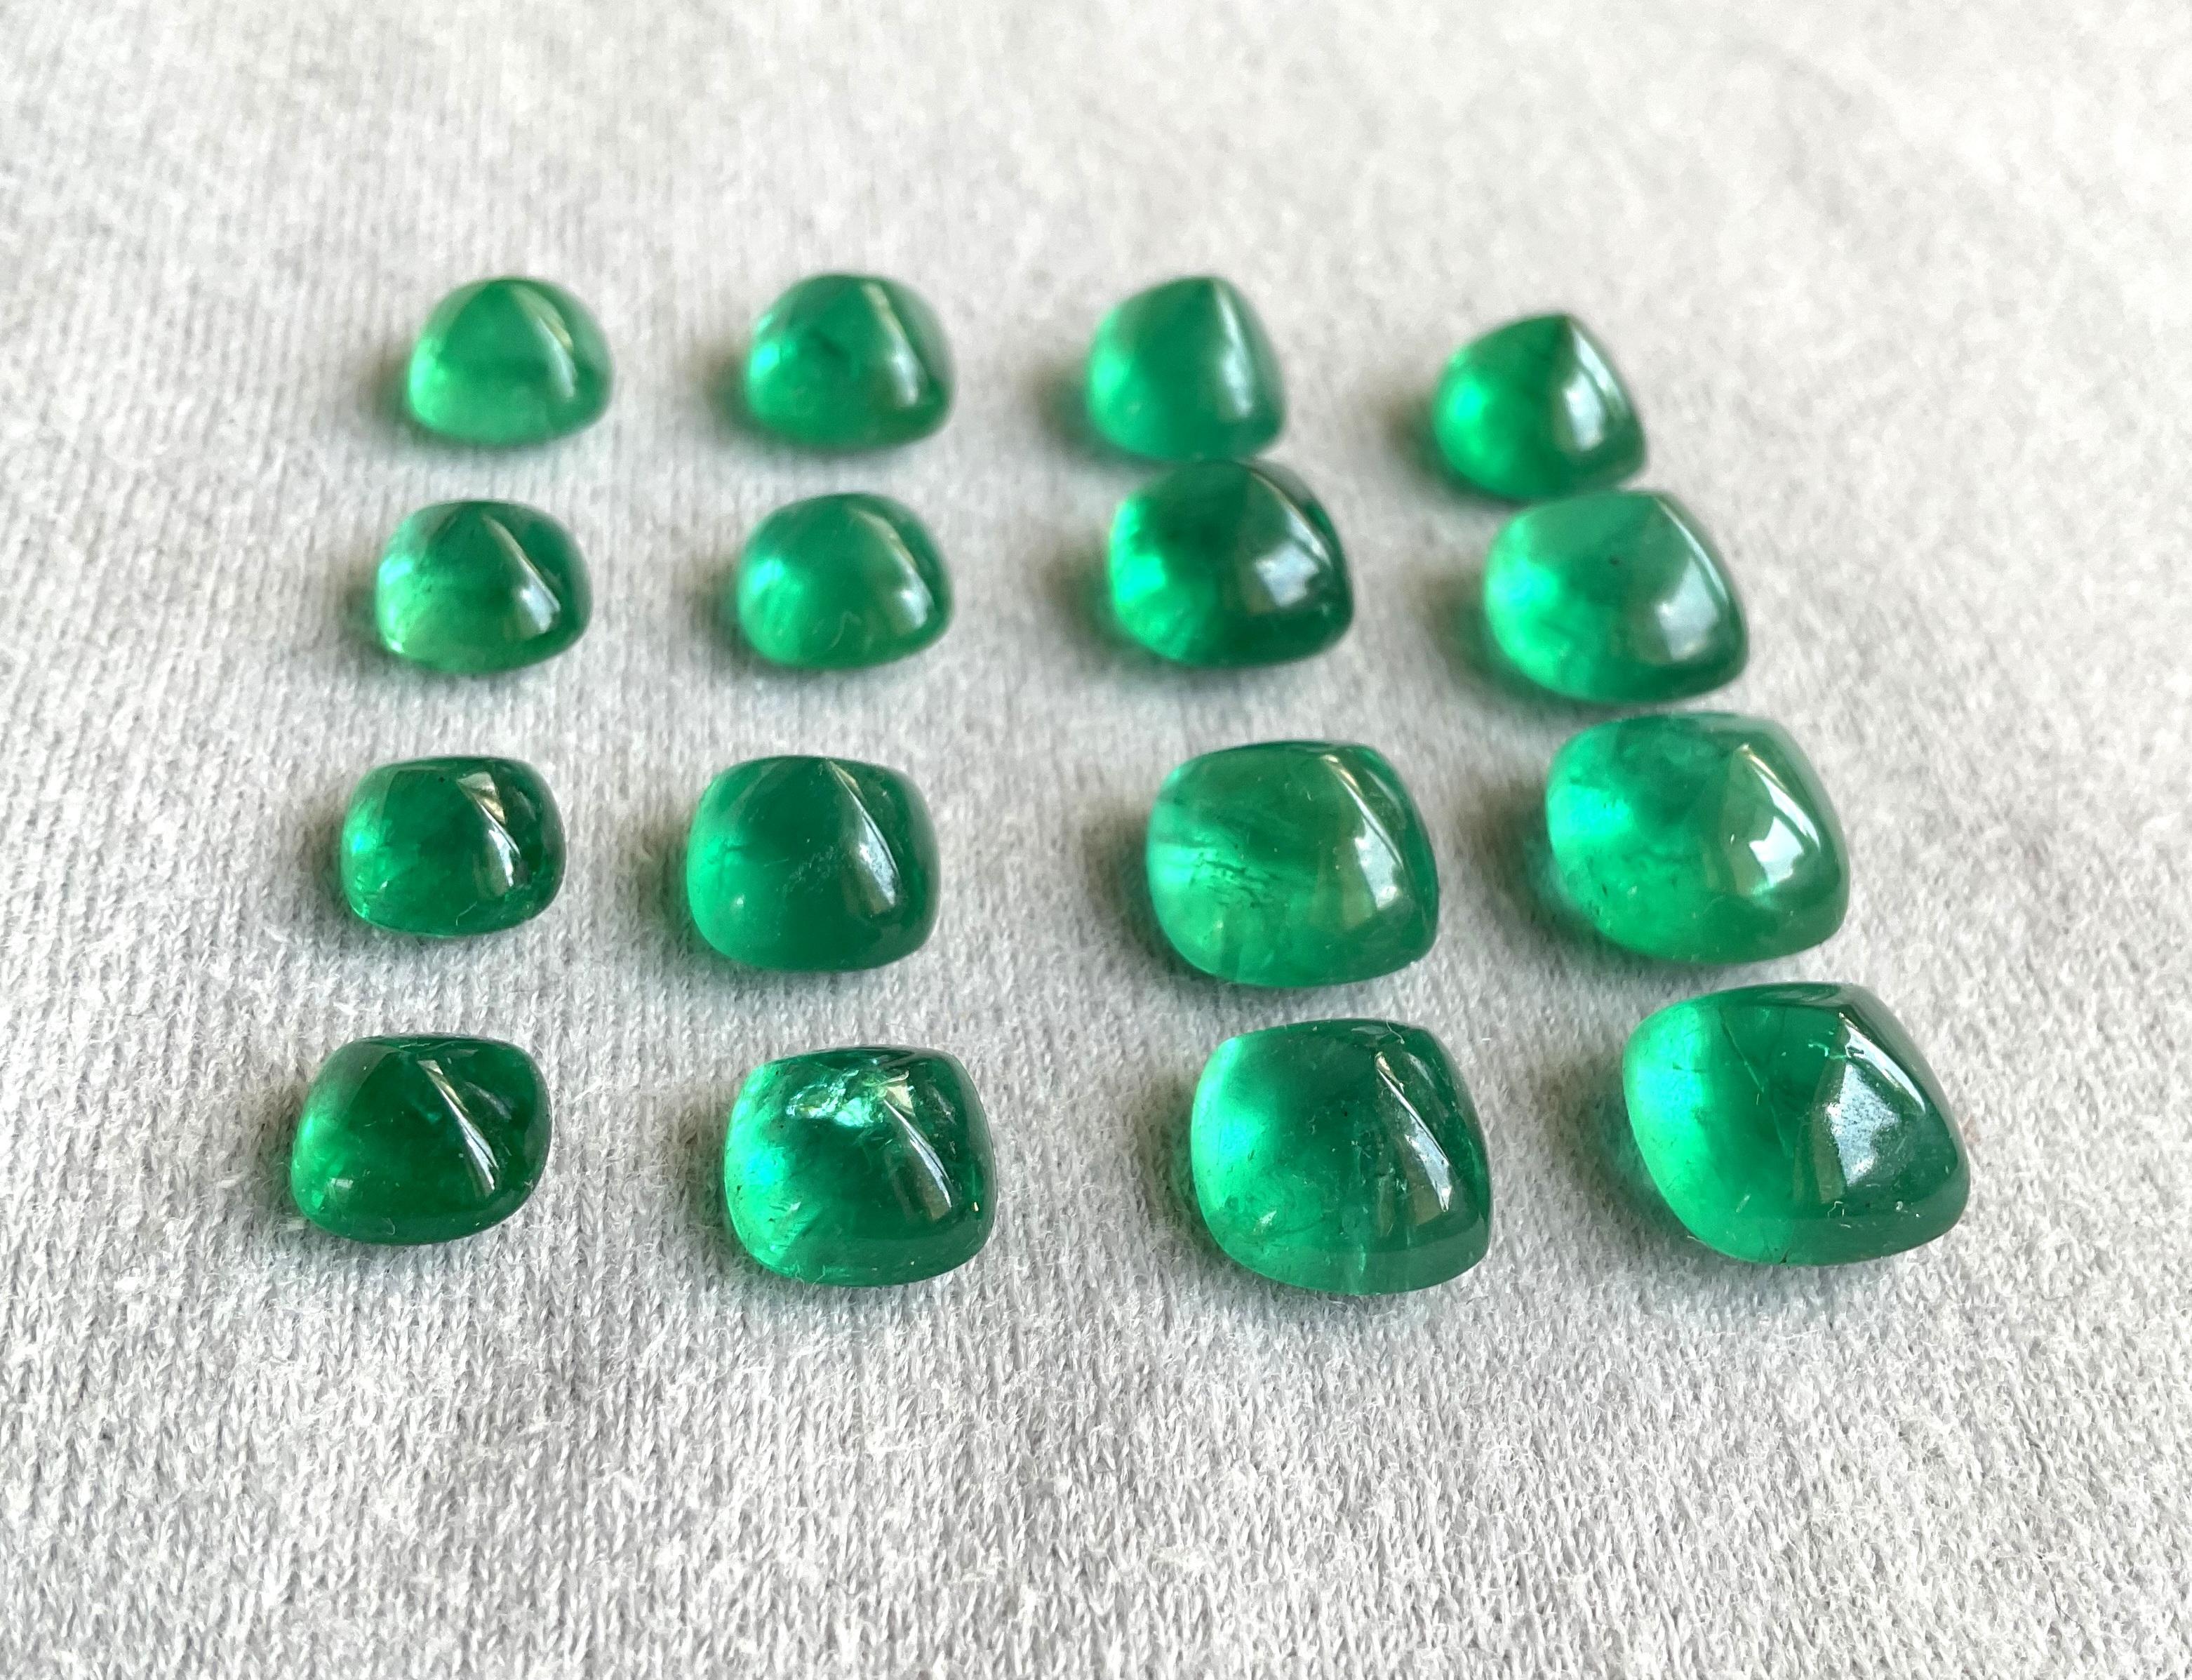 59.30 Carats Zambian Emerald Sugarloaf Cabochon Lot Top Quality Natural Gemstone For Sale 4